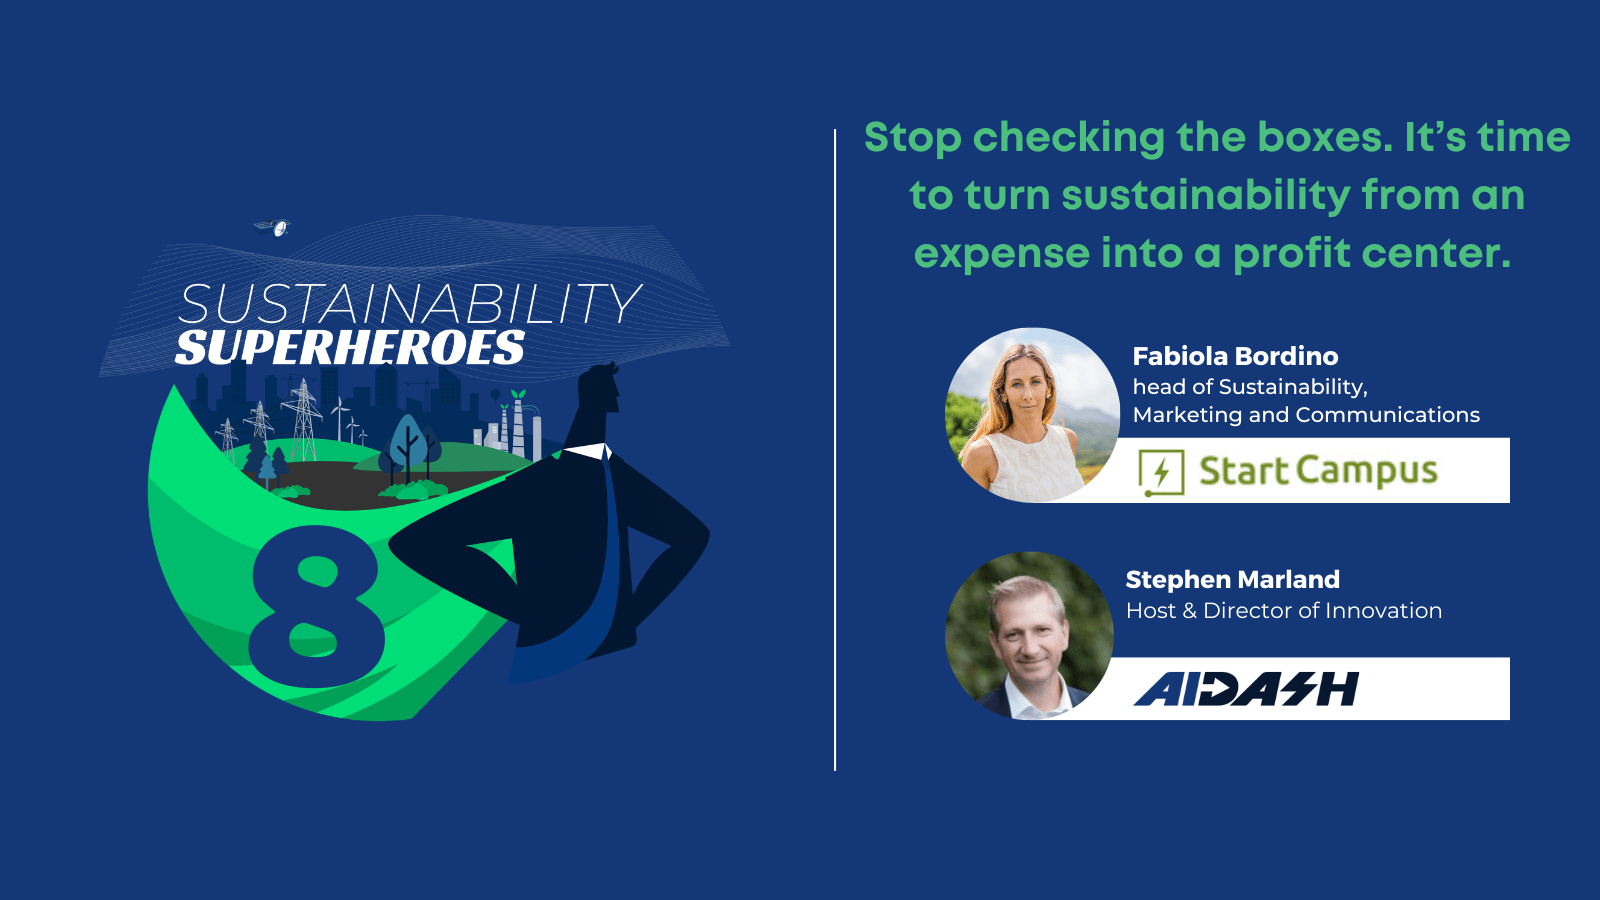 Sustainability Superheroes Ep 8: Stop checking the boxes. It’s time to turn sustainability from an expense into a profit center.